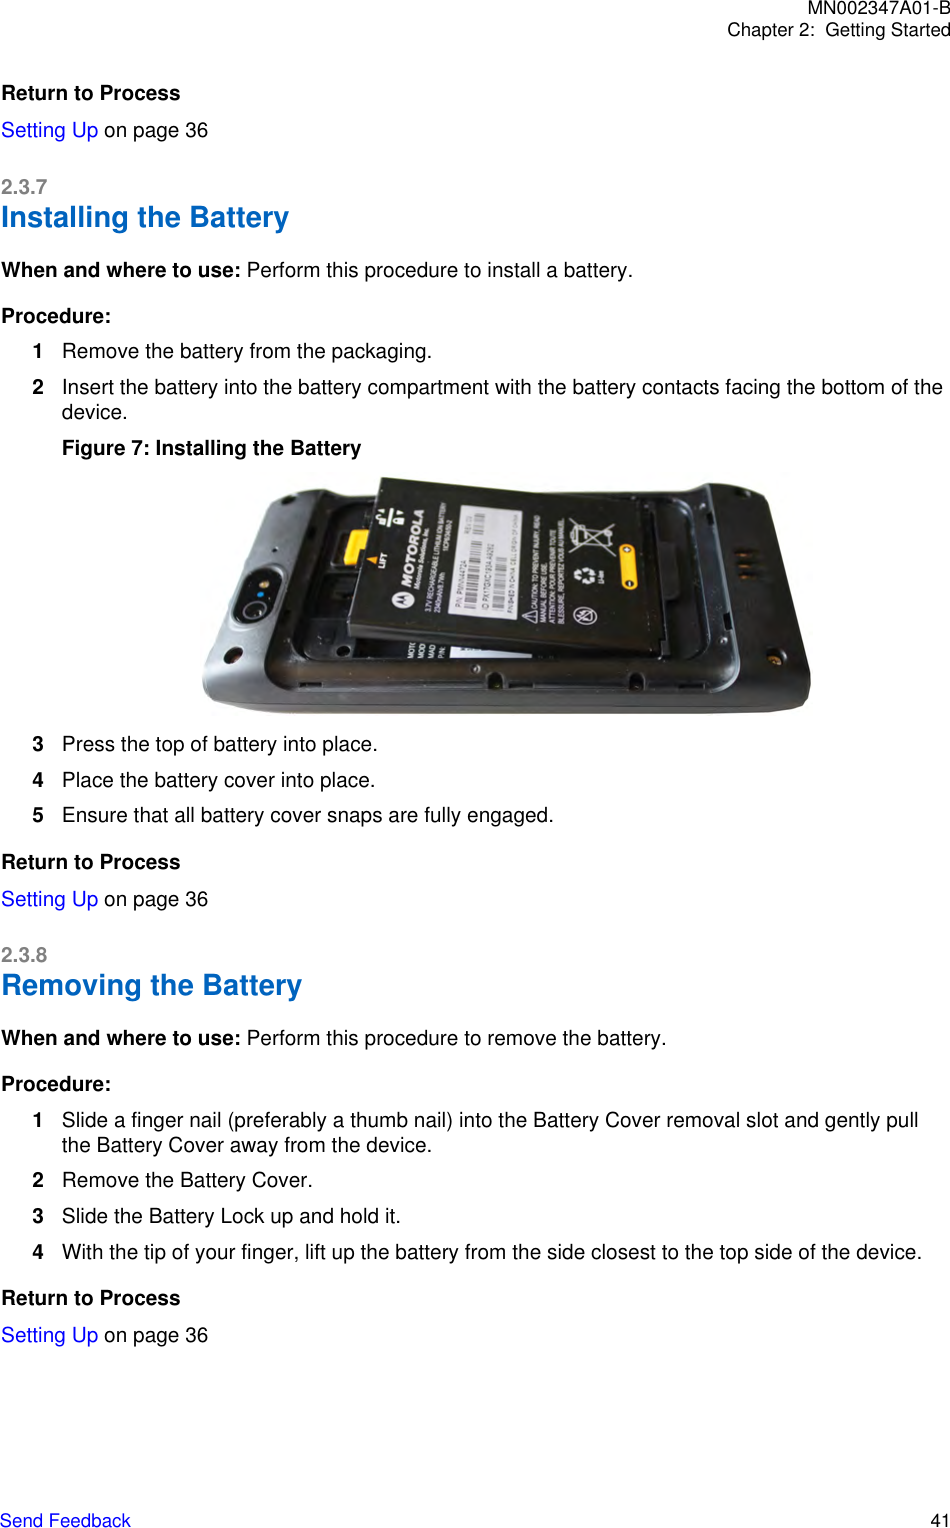 Return to ProcessSetting Up on page 362.3.7Installing the BatteryWhen and where to use: Perform this procedure to install a battery.Procedure:1Remove the battery from the packaging.2Insert the battery into the battery compartment with the battery contacts facing the bottom of thedevice.Figure 7: Installing the Battery3Press the top of battery into place.4Place the battery cover into place.5Ensure that all battery cover snaps are fully engaged.Return to ProcessSetting Up on page 362.3.8Removing the BatteryWhen and where to use: Perform this procedure to remove the battery.Procedure:1Slide a finger nail (preferably a thumb nail) into the Battery Cover removal slot and gently pullthe Battery Cover away from the device.2Remove the Battery Cover.3Slide the Battery Lock up and hold it.4With the tip of your finger, lift up the battery from the side closest to the top side of the device.Return to ProcessSetting Up on page 36MN002347A01-BChapter 2:  Getting StartedSend Feedback   41